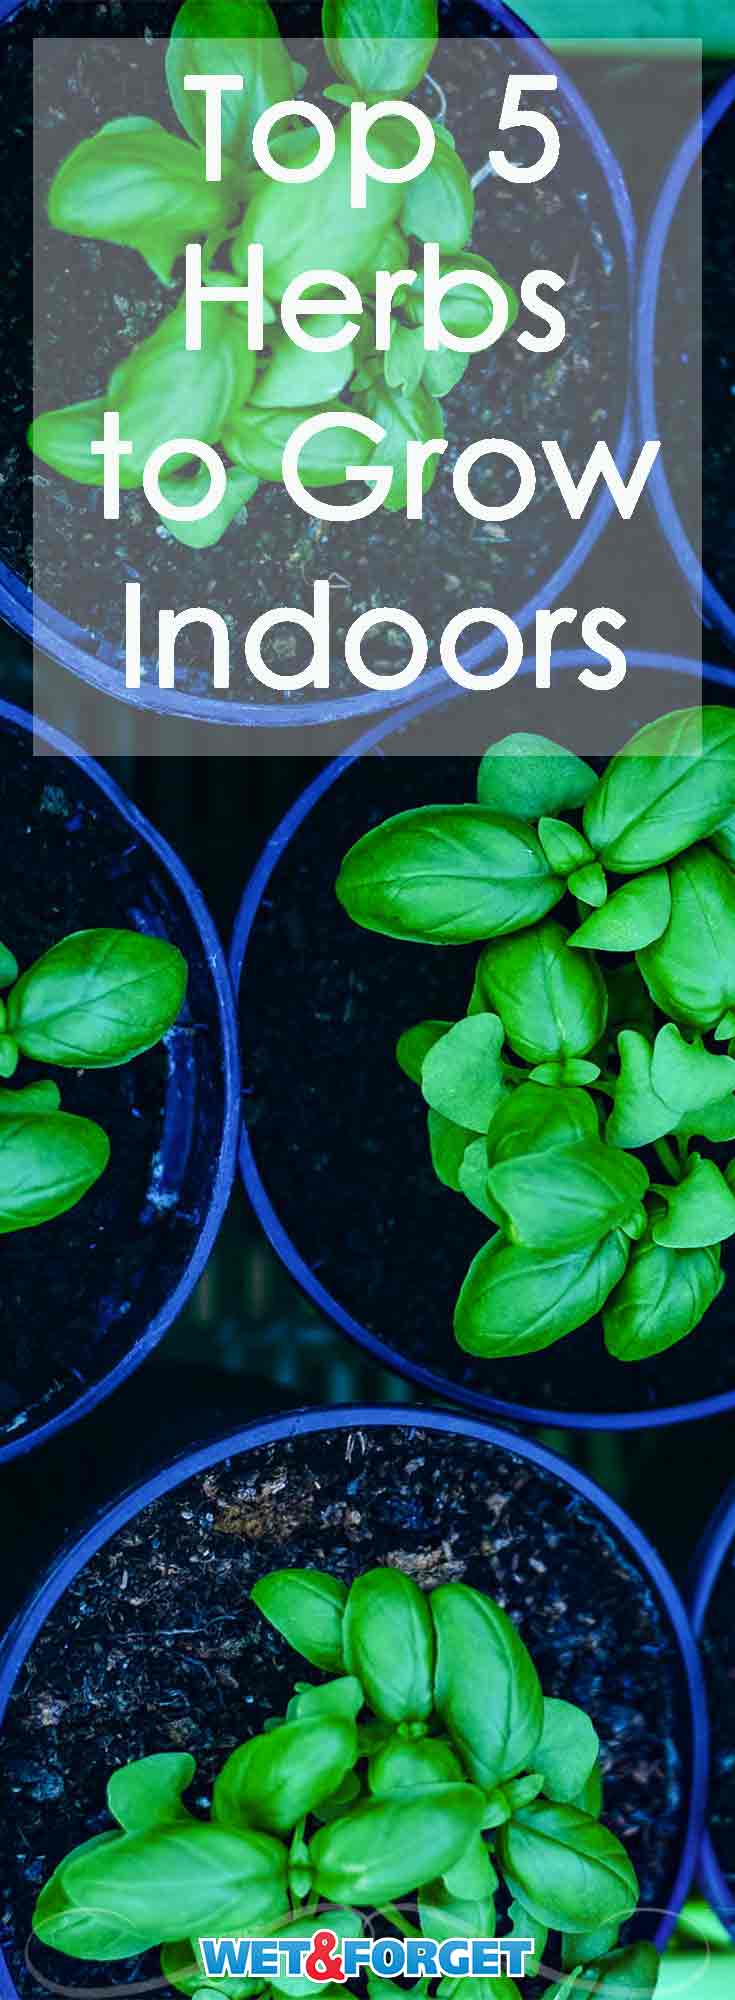 Although the snow may be falling, many herbs thrive indoors! Read about the top herbs to grow in your indoor garden. 